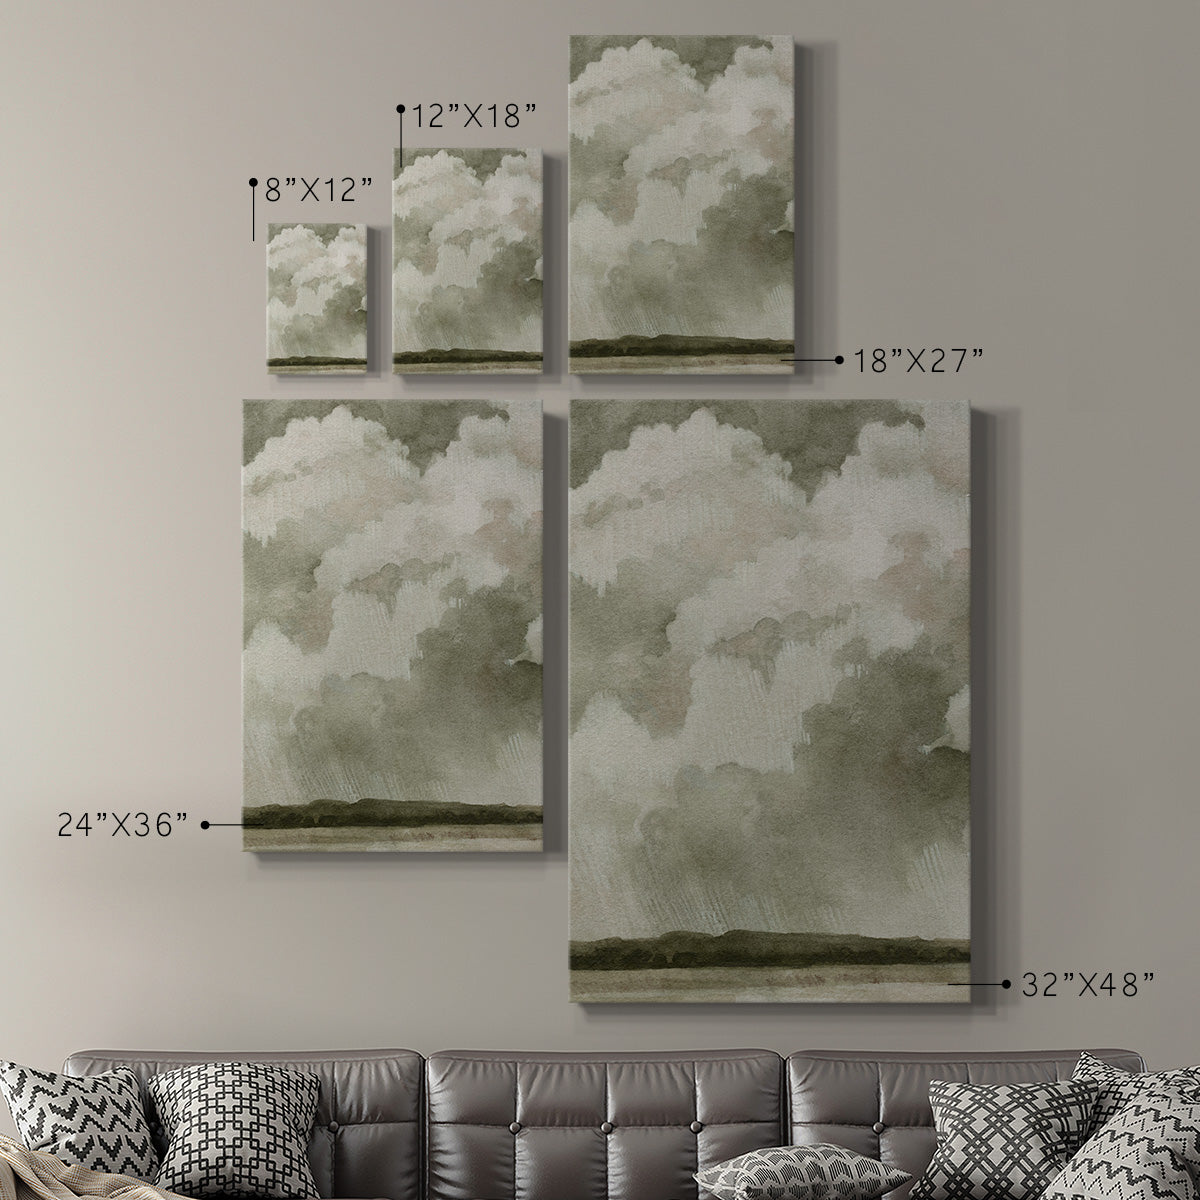 Big Dark Sky I Premium Gallery Wrapped Canvas - Ready to Hang